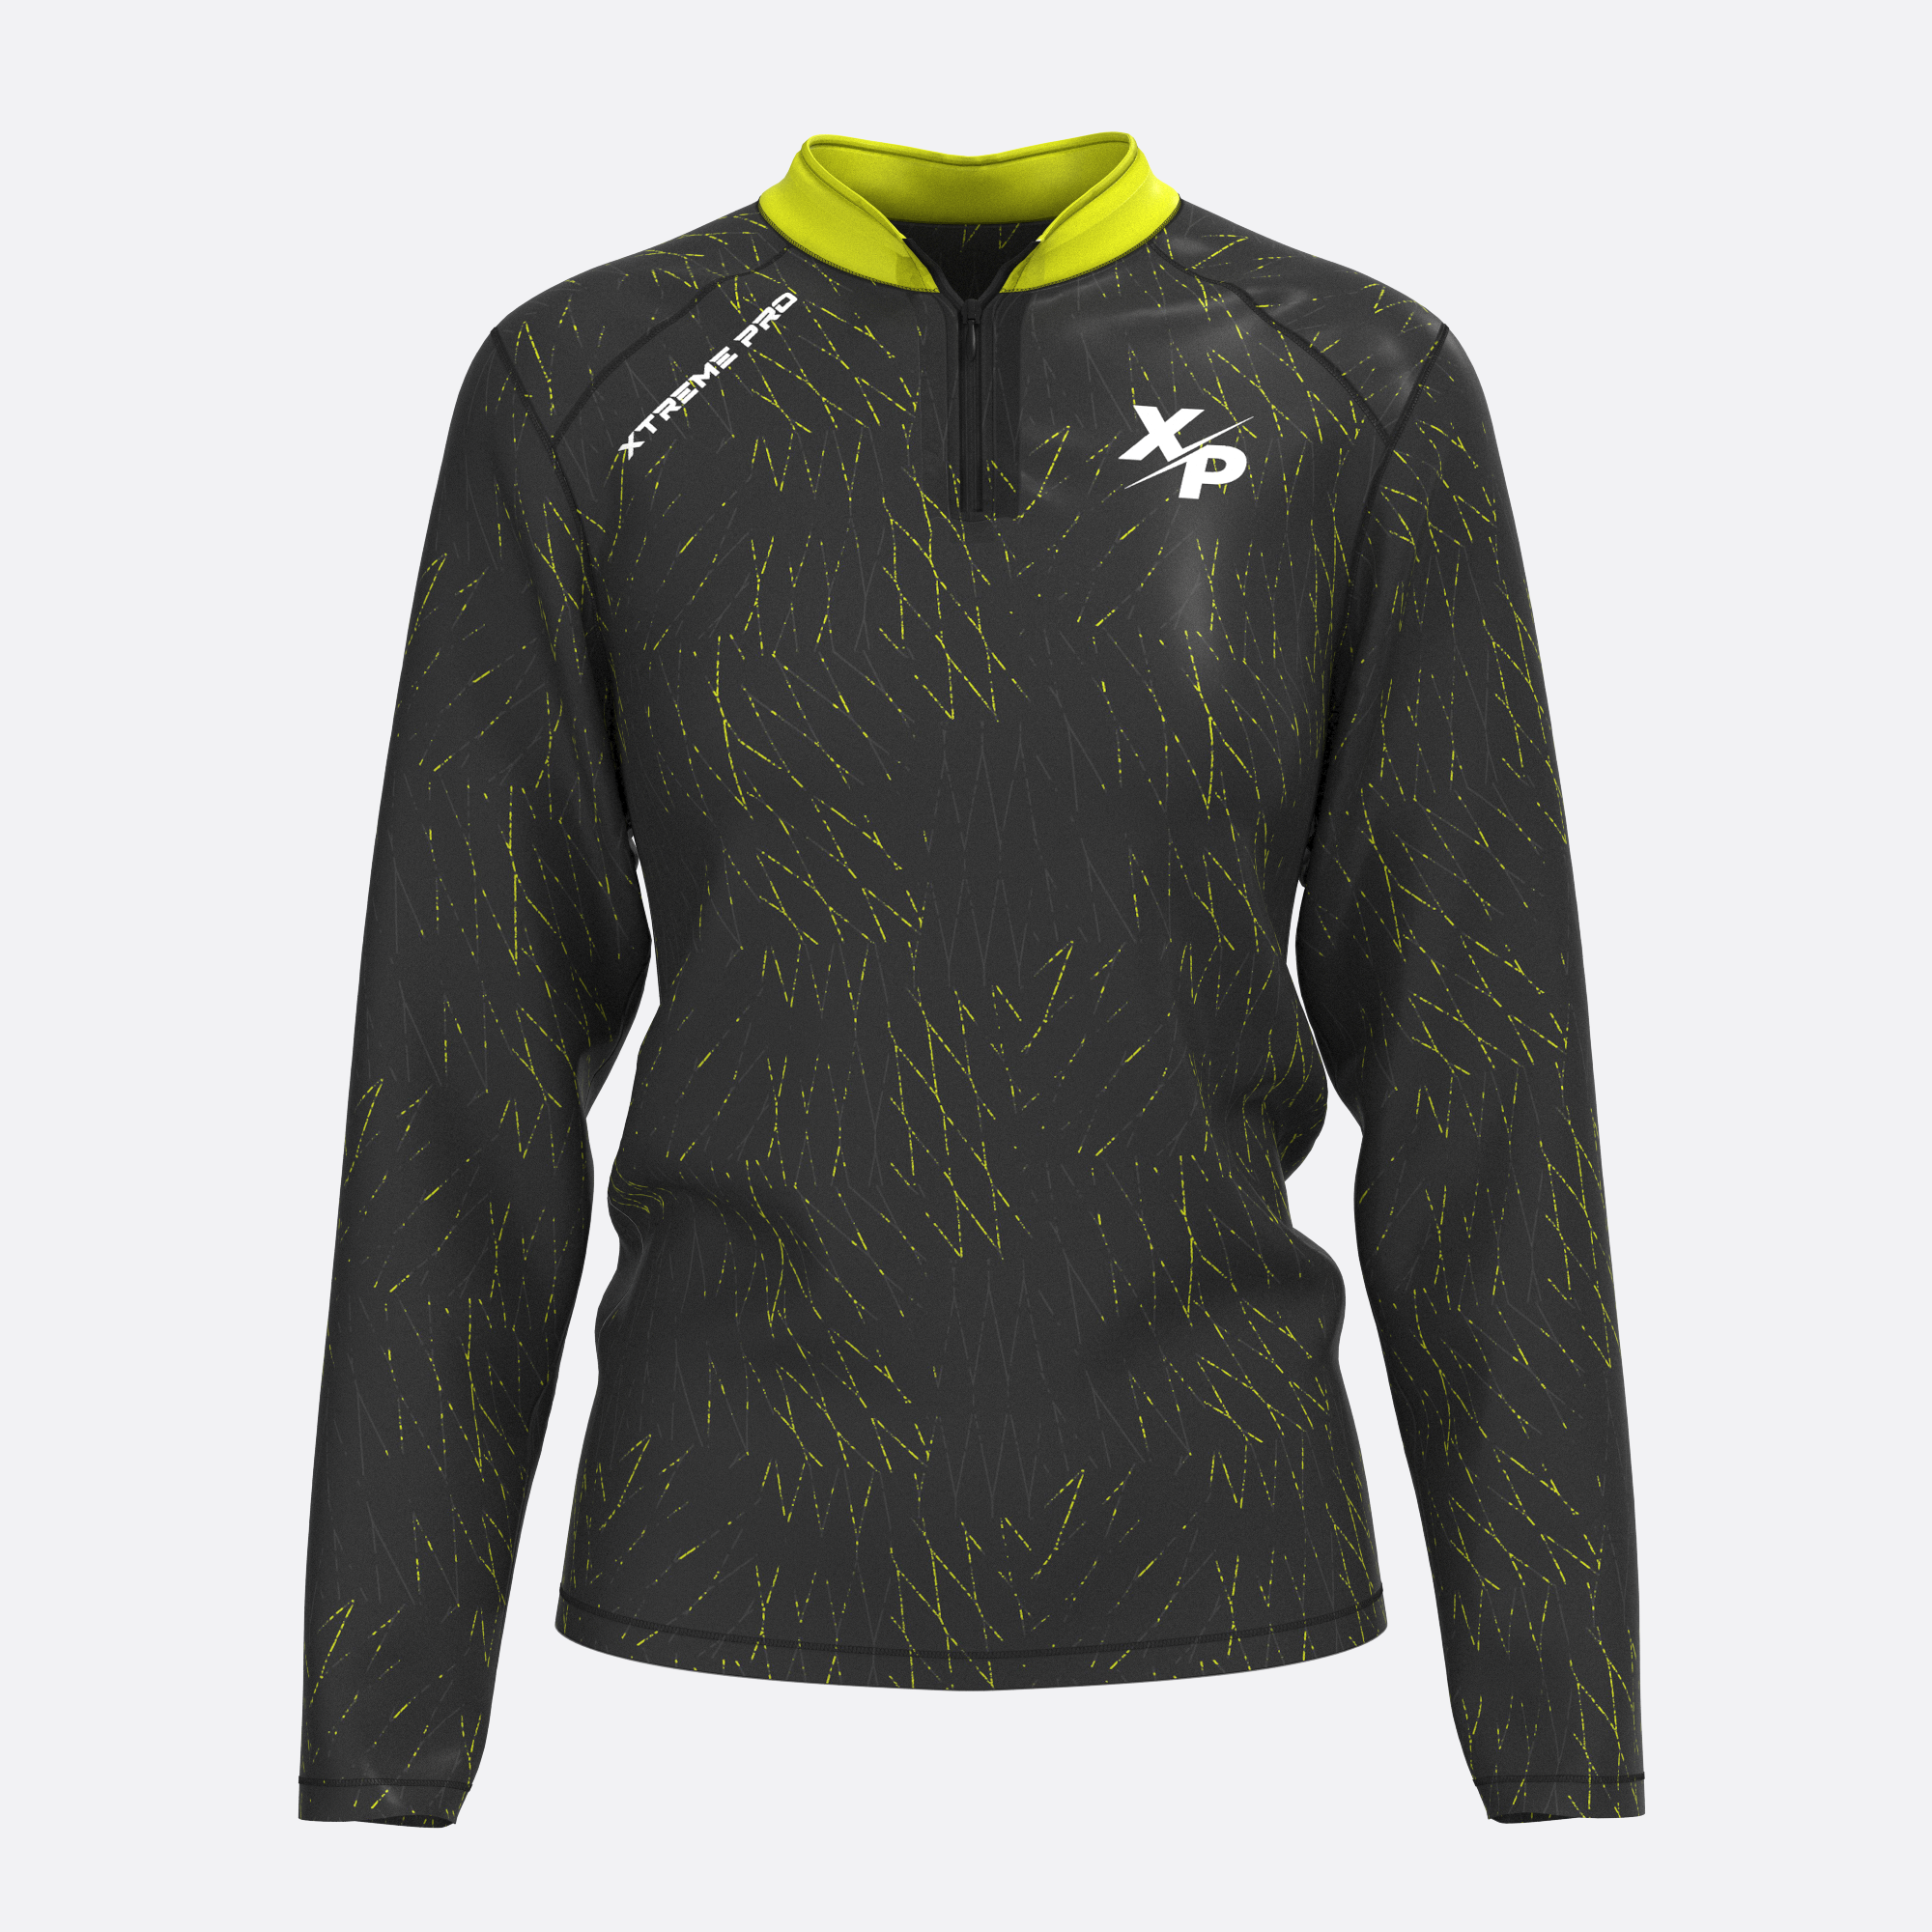 Caged Quarter Zip Jacket in Yellow Xtreme Pro Apparel